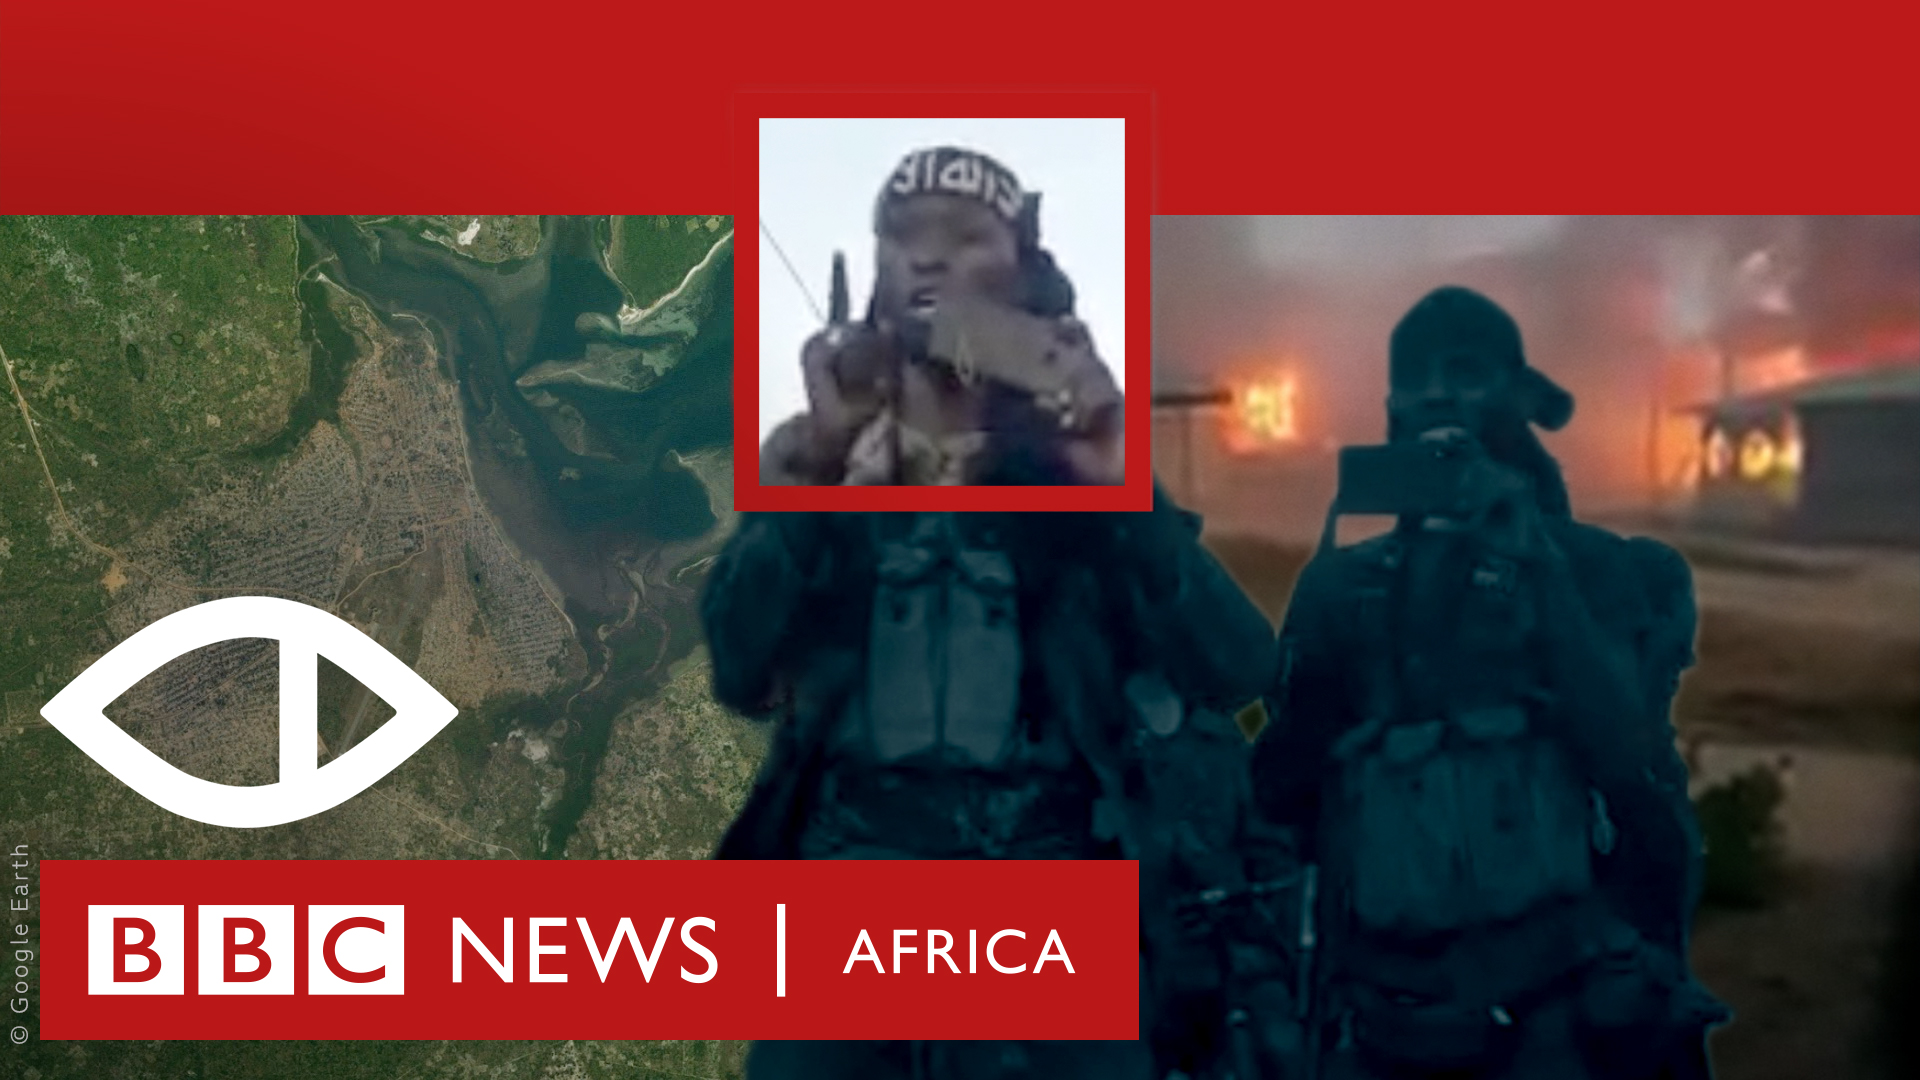 VIDEO: How Mozambique Became Southern Africa’s Latest Terrorism Hotspot